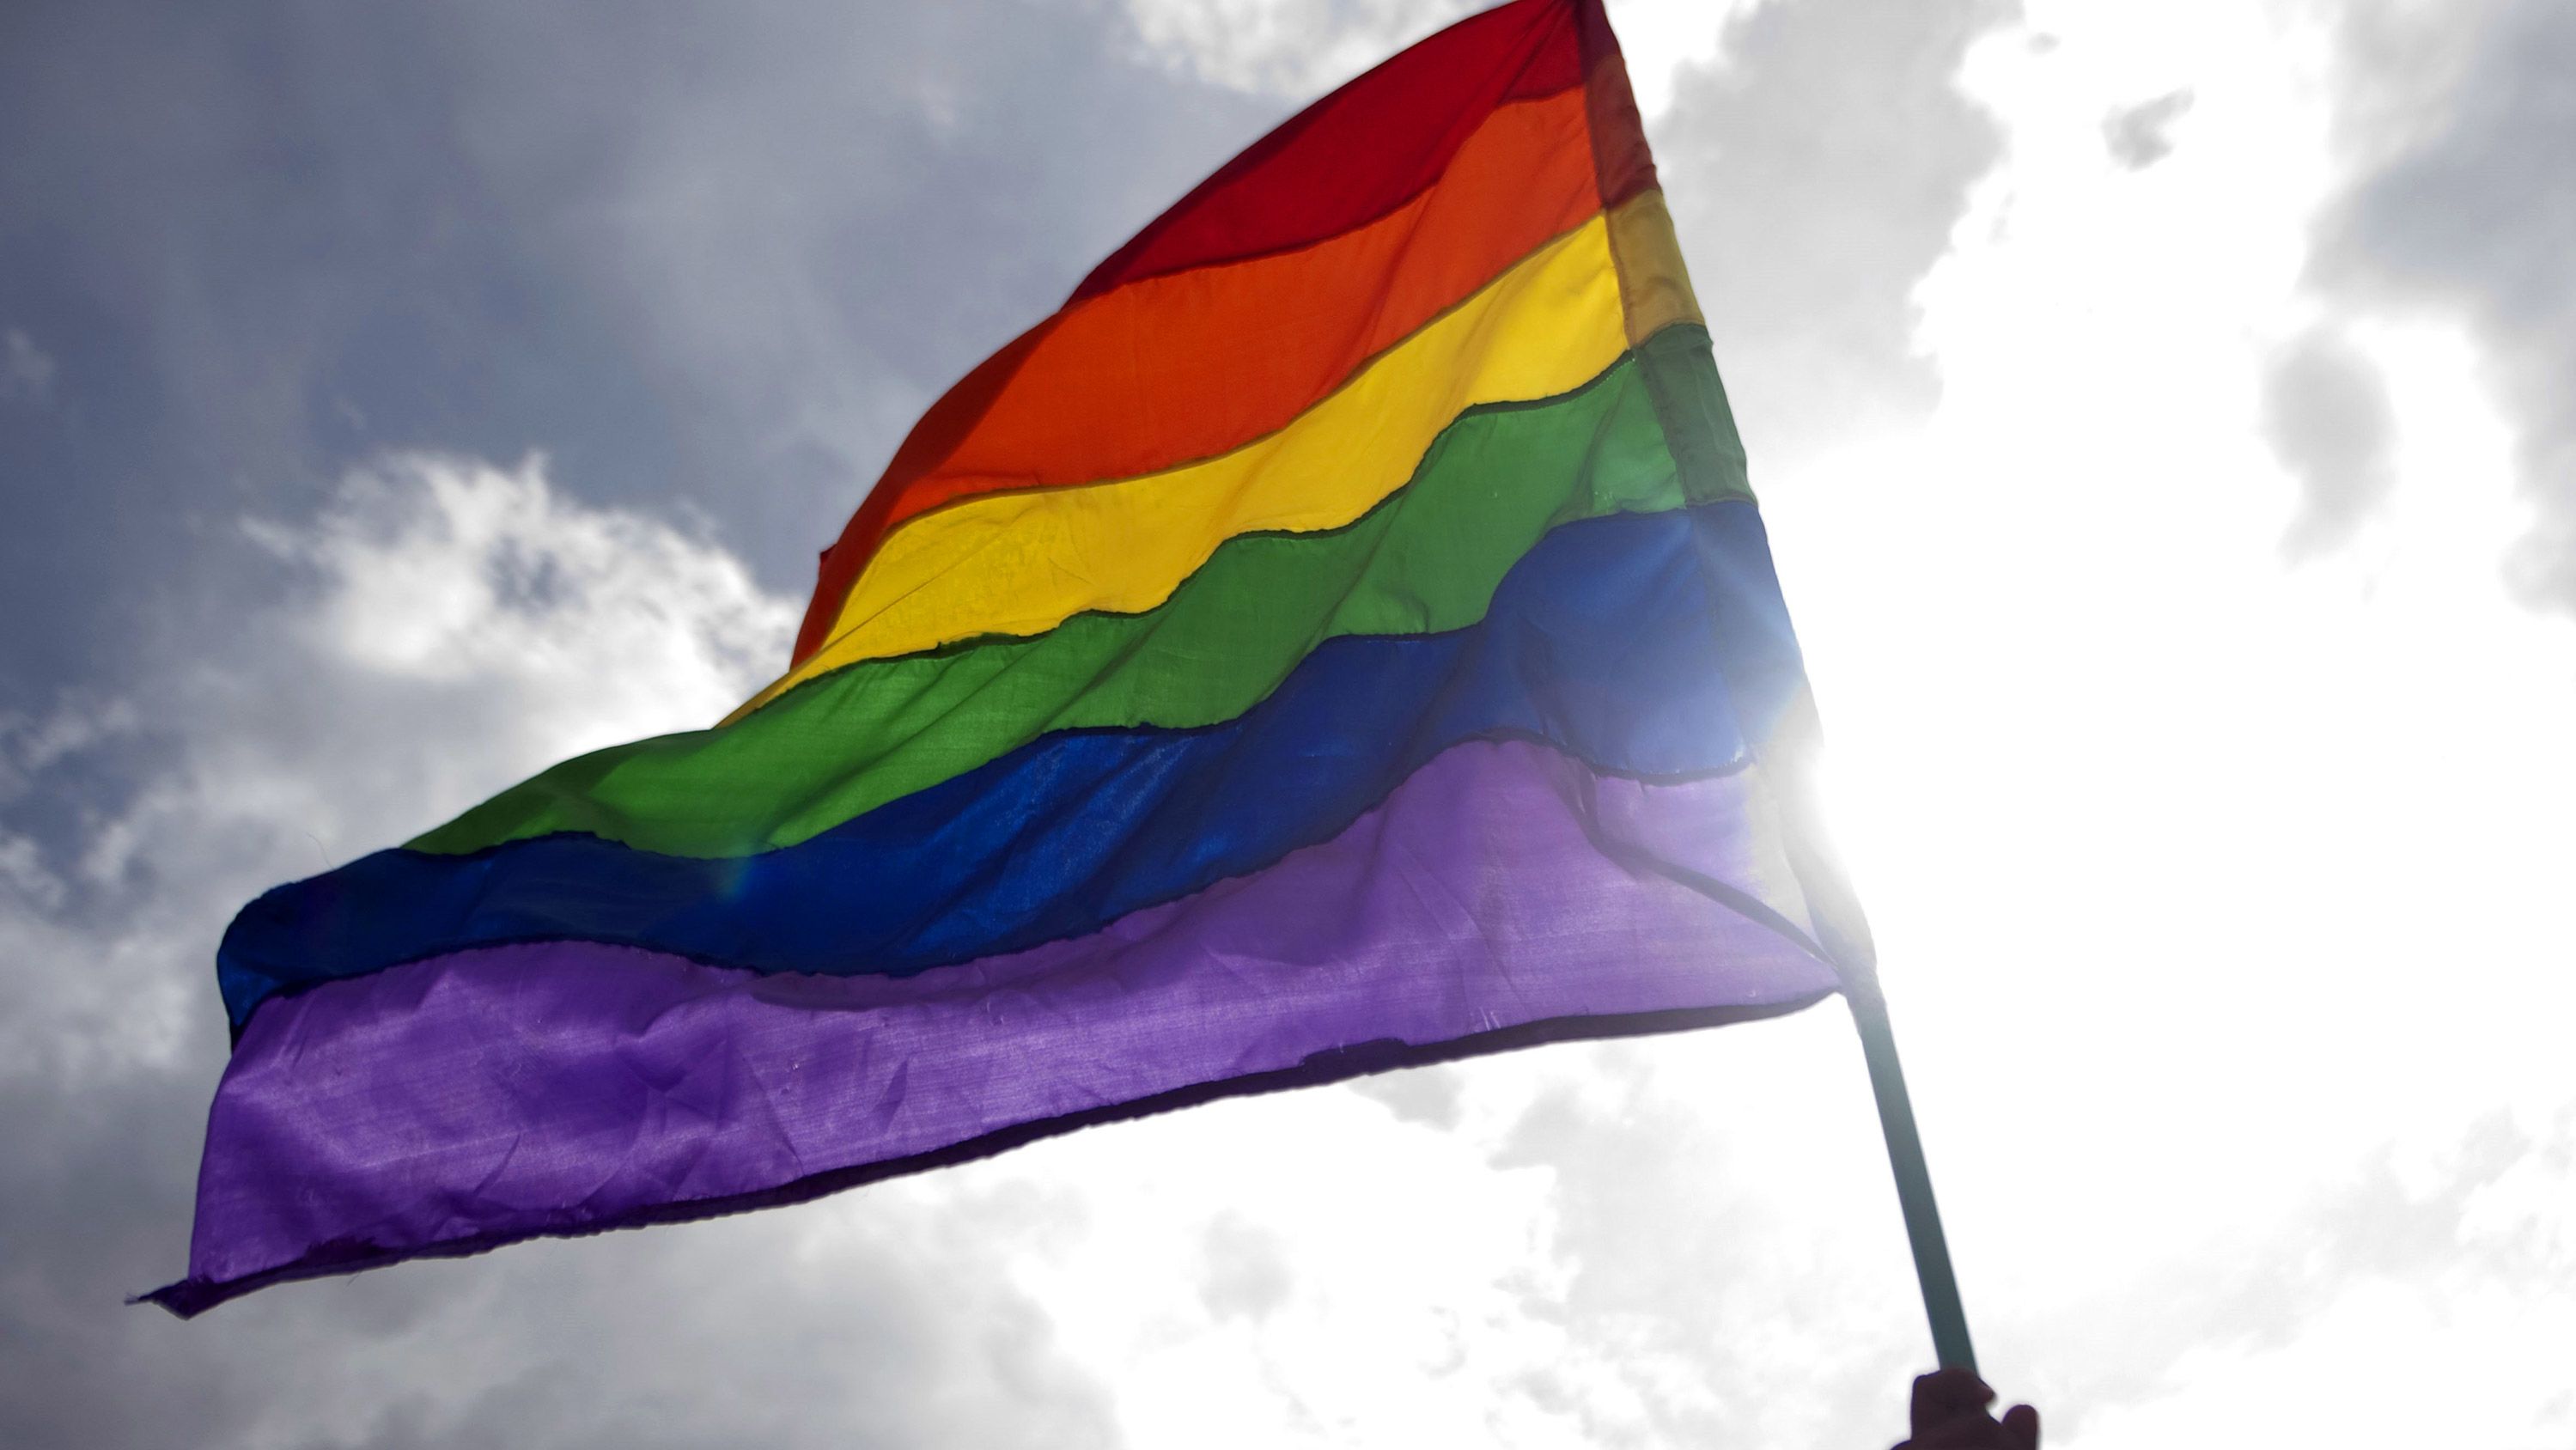 The study was released on the International Day Against Homophobia, Transphobia and Biphobia.